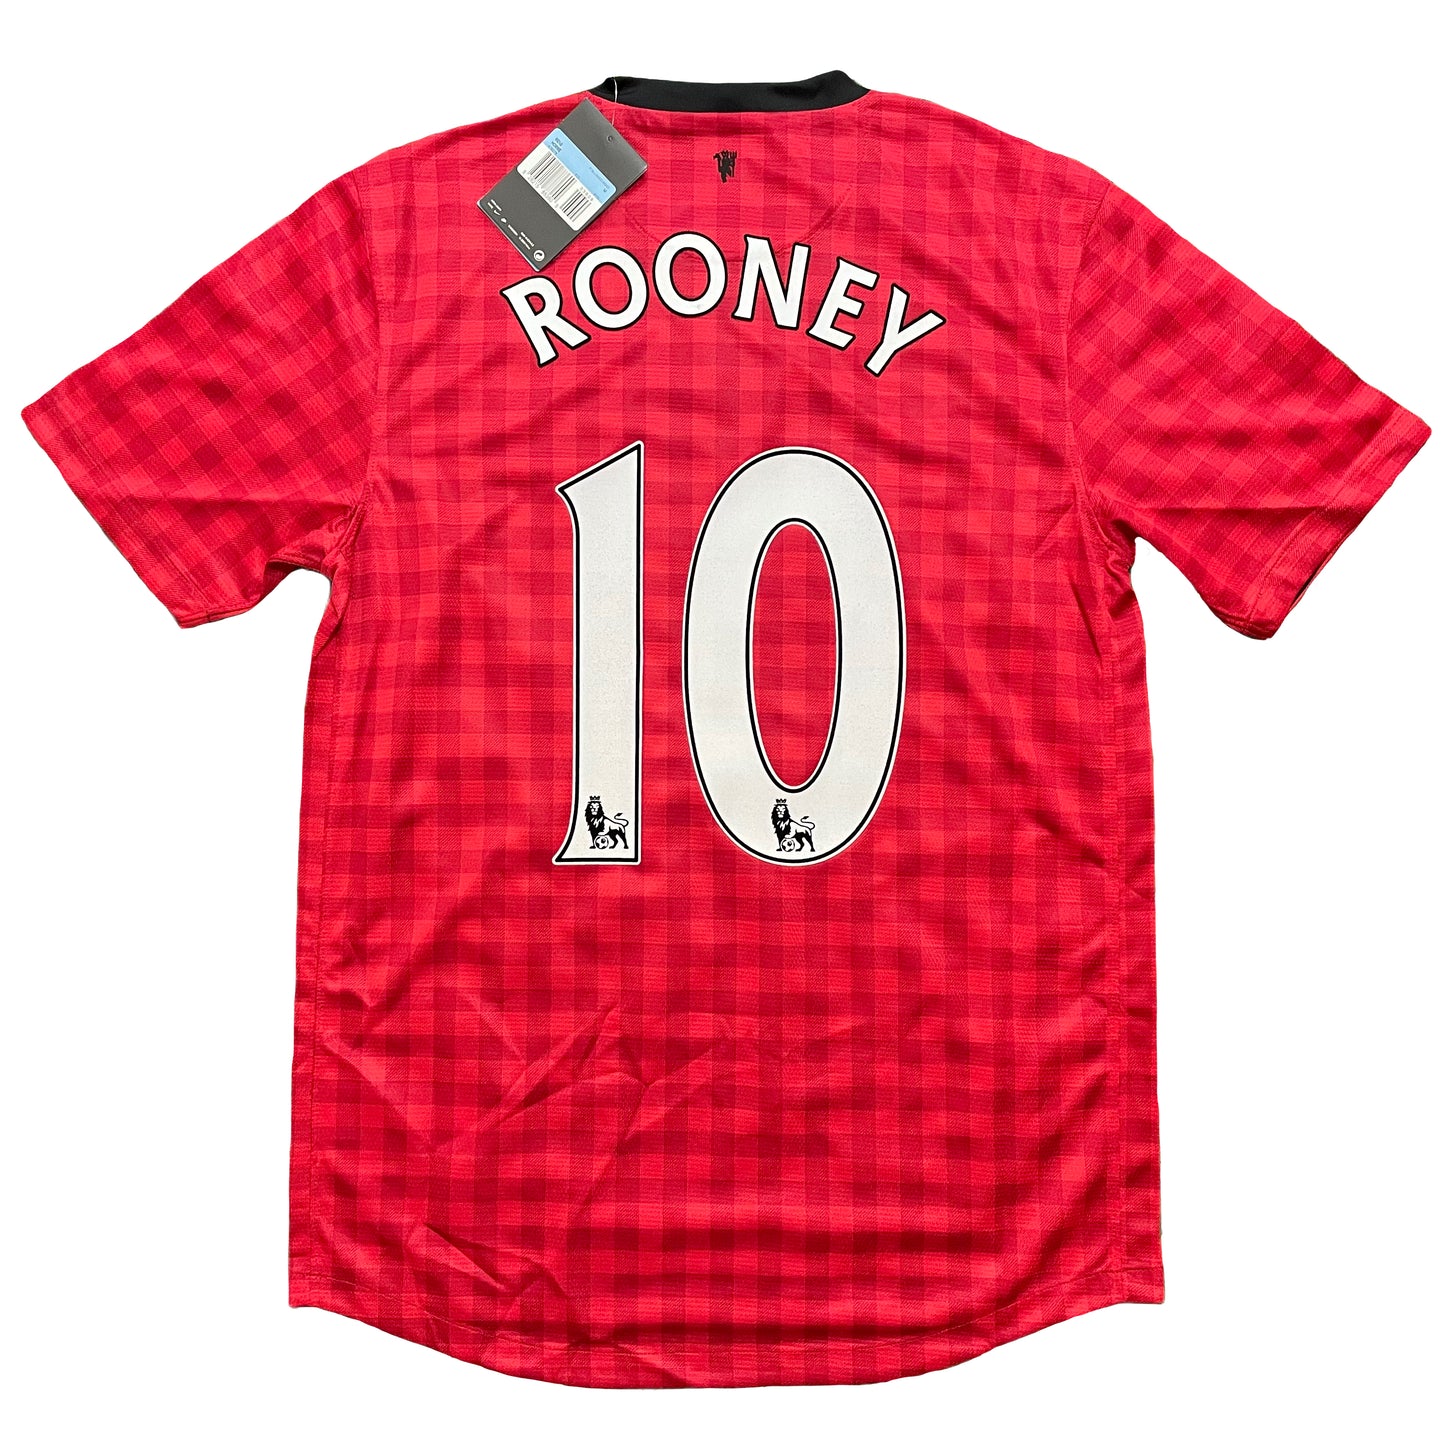 2012-2013 Manchester United FC home shirt #10 Rooney (M)